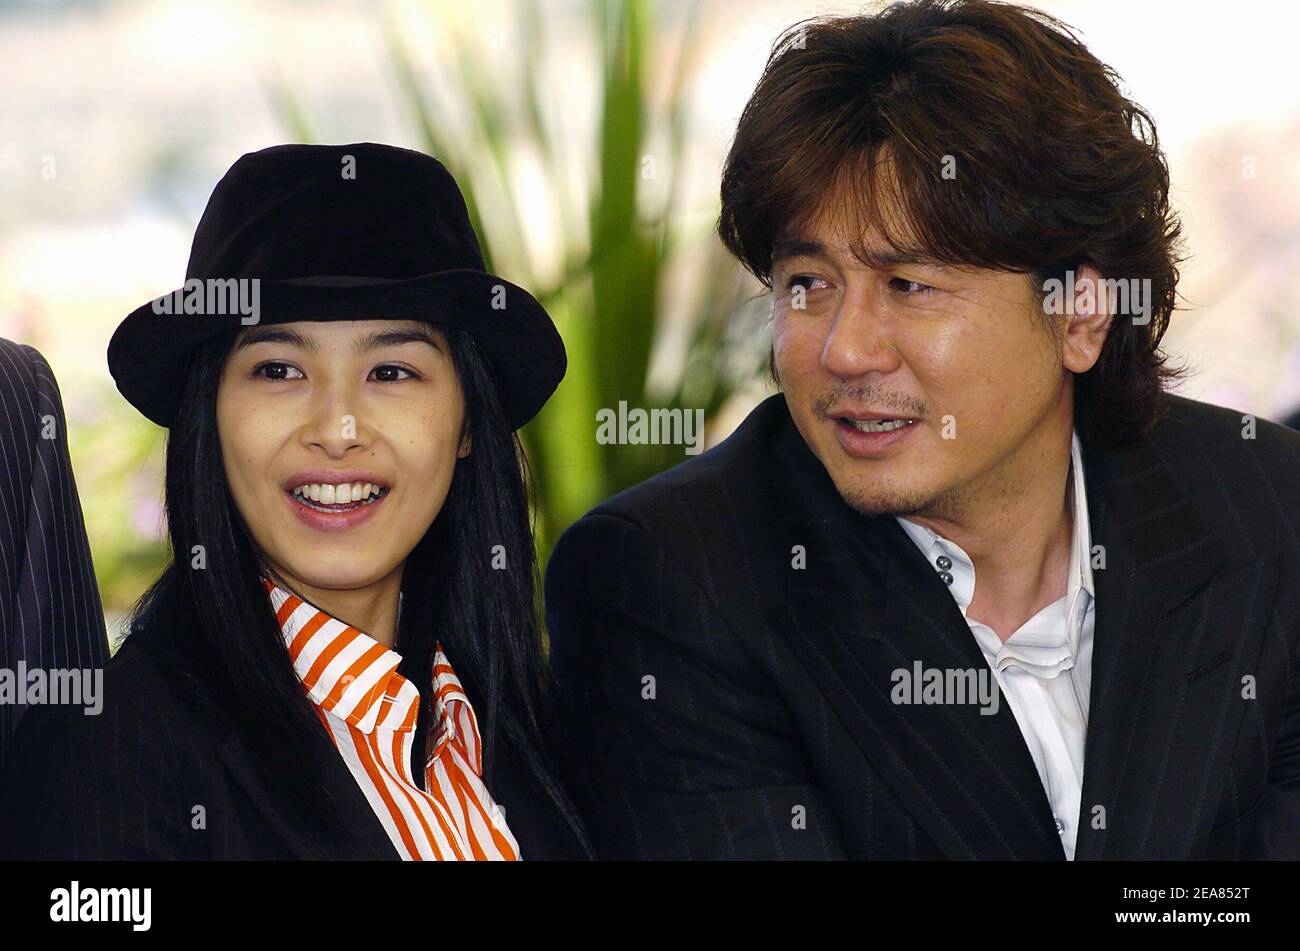 Jie-Tae Yu, Min-Sik Choi poses for photographers during the photocall for 'Old  Boy' during the 57th Cannes film Festival in France. May 15, 2004  (Pictured: Jie-Tae Yoo, Min-Sik Choi ) Photo by